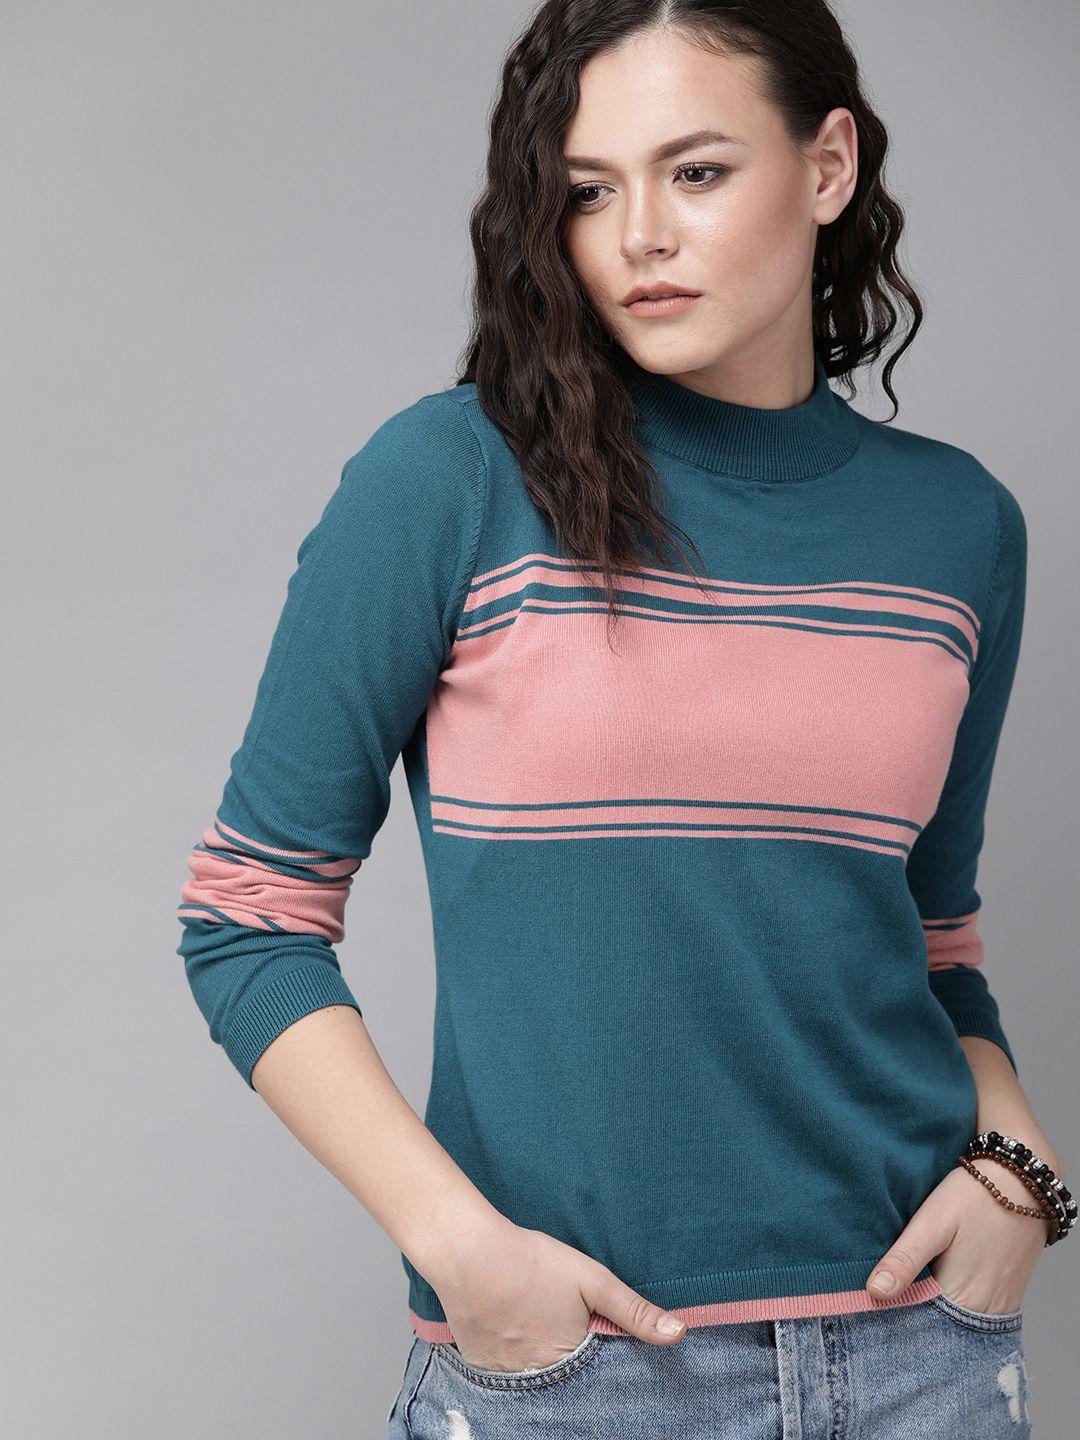 the roadster lifestyle co women teal blue & pink colourblocked top